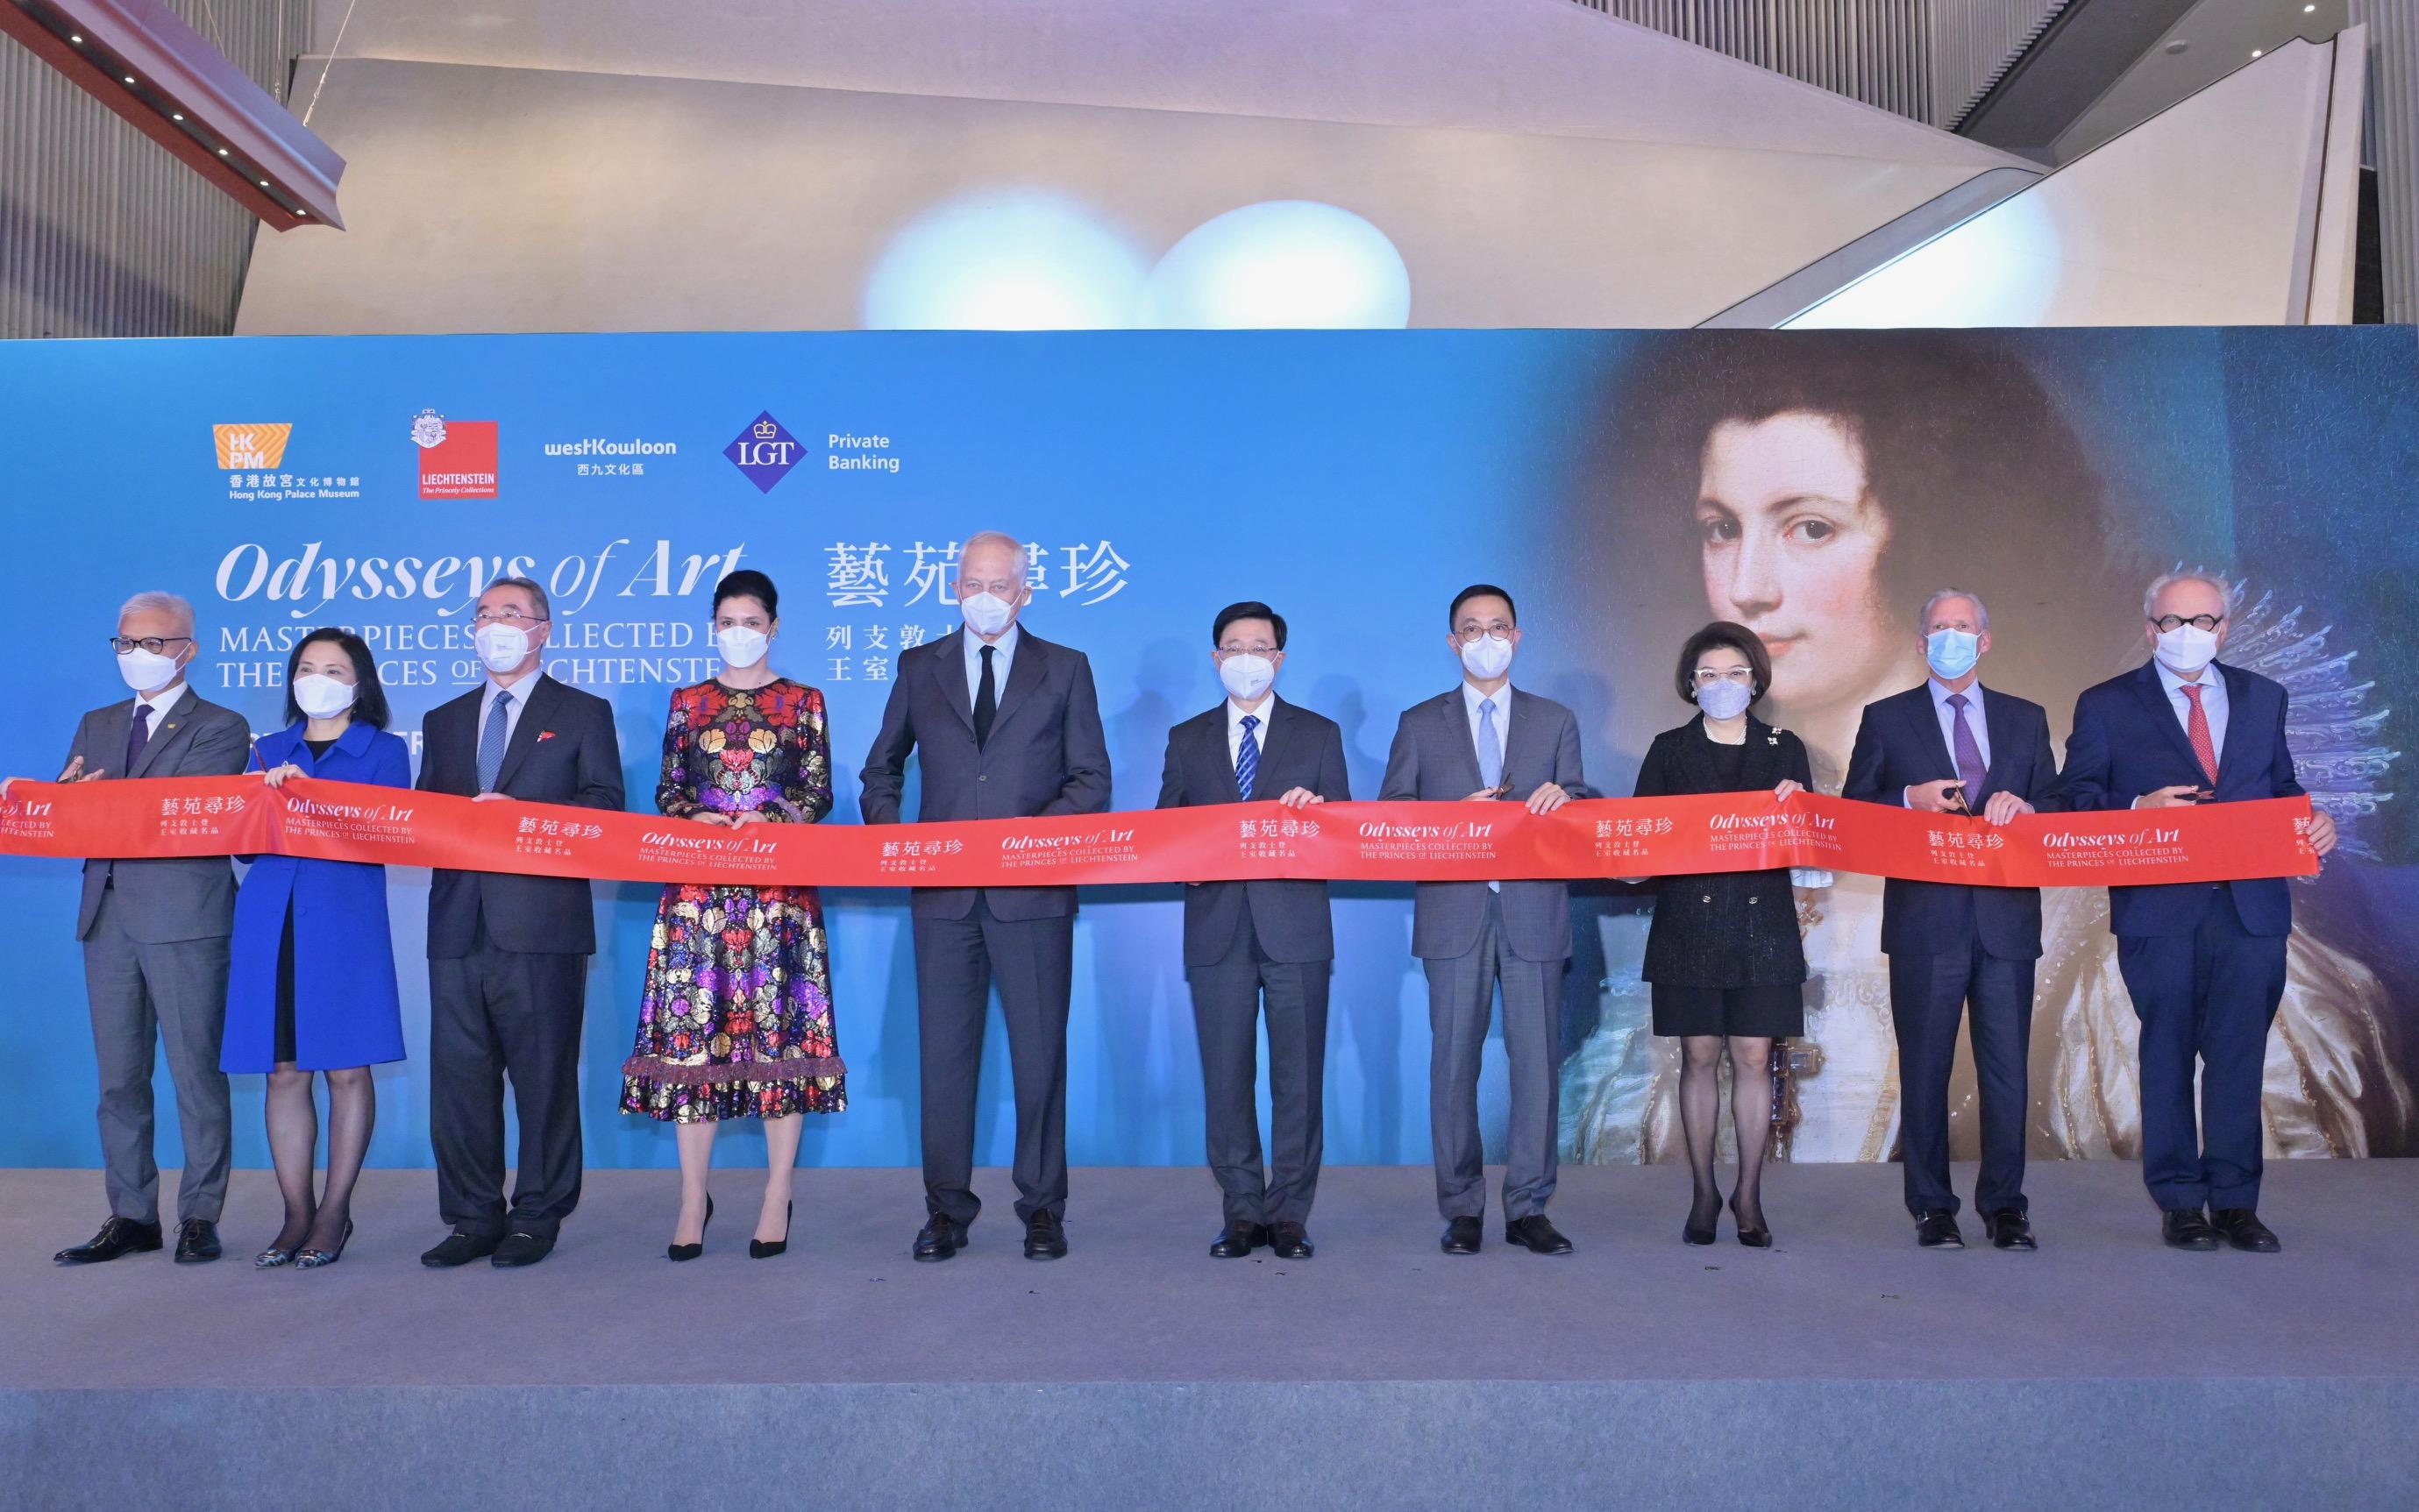 The Chief Executive, Mr John Lee, attended the opening ceremony of "Odysseys of Art: Masterpieces Collected by the Princes of Liechtenstein" today (November 8). Photo shows (from left) the Museum Director of the Hong Kong Palace Museum (HKPM), Dr Louis Ng; the Chief Executive Officer of the West Kowloon Cultural District Authority (WKCDA), Mrs Betty Fung; the Chairman of the Board of the WKCDA, Mr Henry Tang; H.S.H. Princess Adelheid Coudenhove-Kalergi of the House of Liechtenstein; H.S.H. Prince Hans-Adam II, Reigning Prince of the House of Liechtenstein; Mr Lee; the Secretary for Culture, Sports and Tourism, Mr Kevin Yeung; the Chairman of the Board of the HKPM, Ms Winnie Tam; the Chief Executive Officer of LGT Private Banking Asia, Dr Henri Leimer; and the Director of the Liechtenstein Princely Collections, Dr Johann Kräftner, officiating at the ribbon-cutting ceremony. 